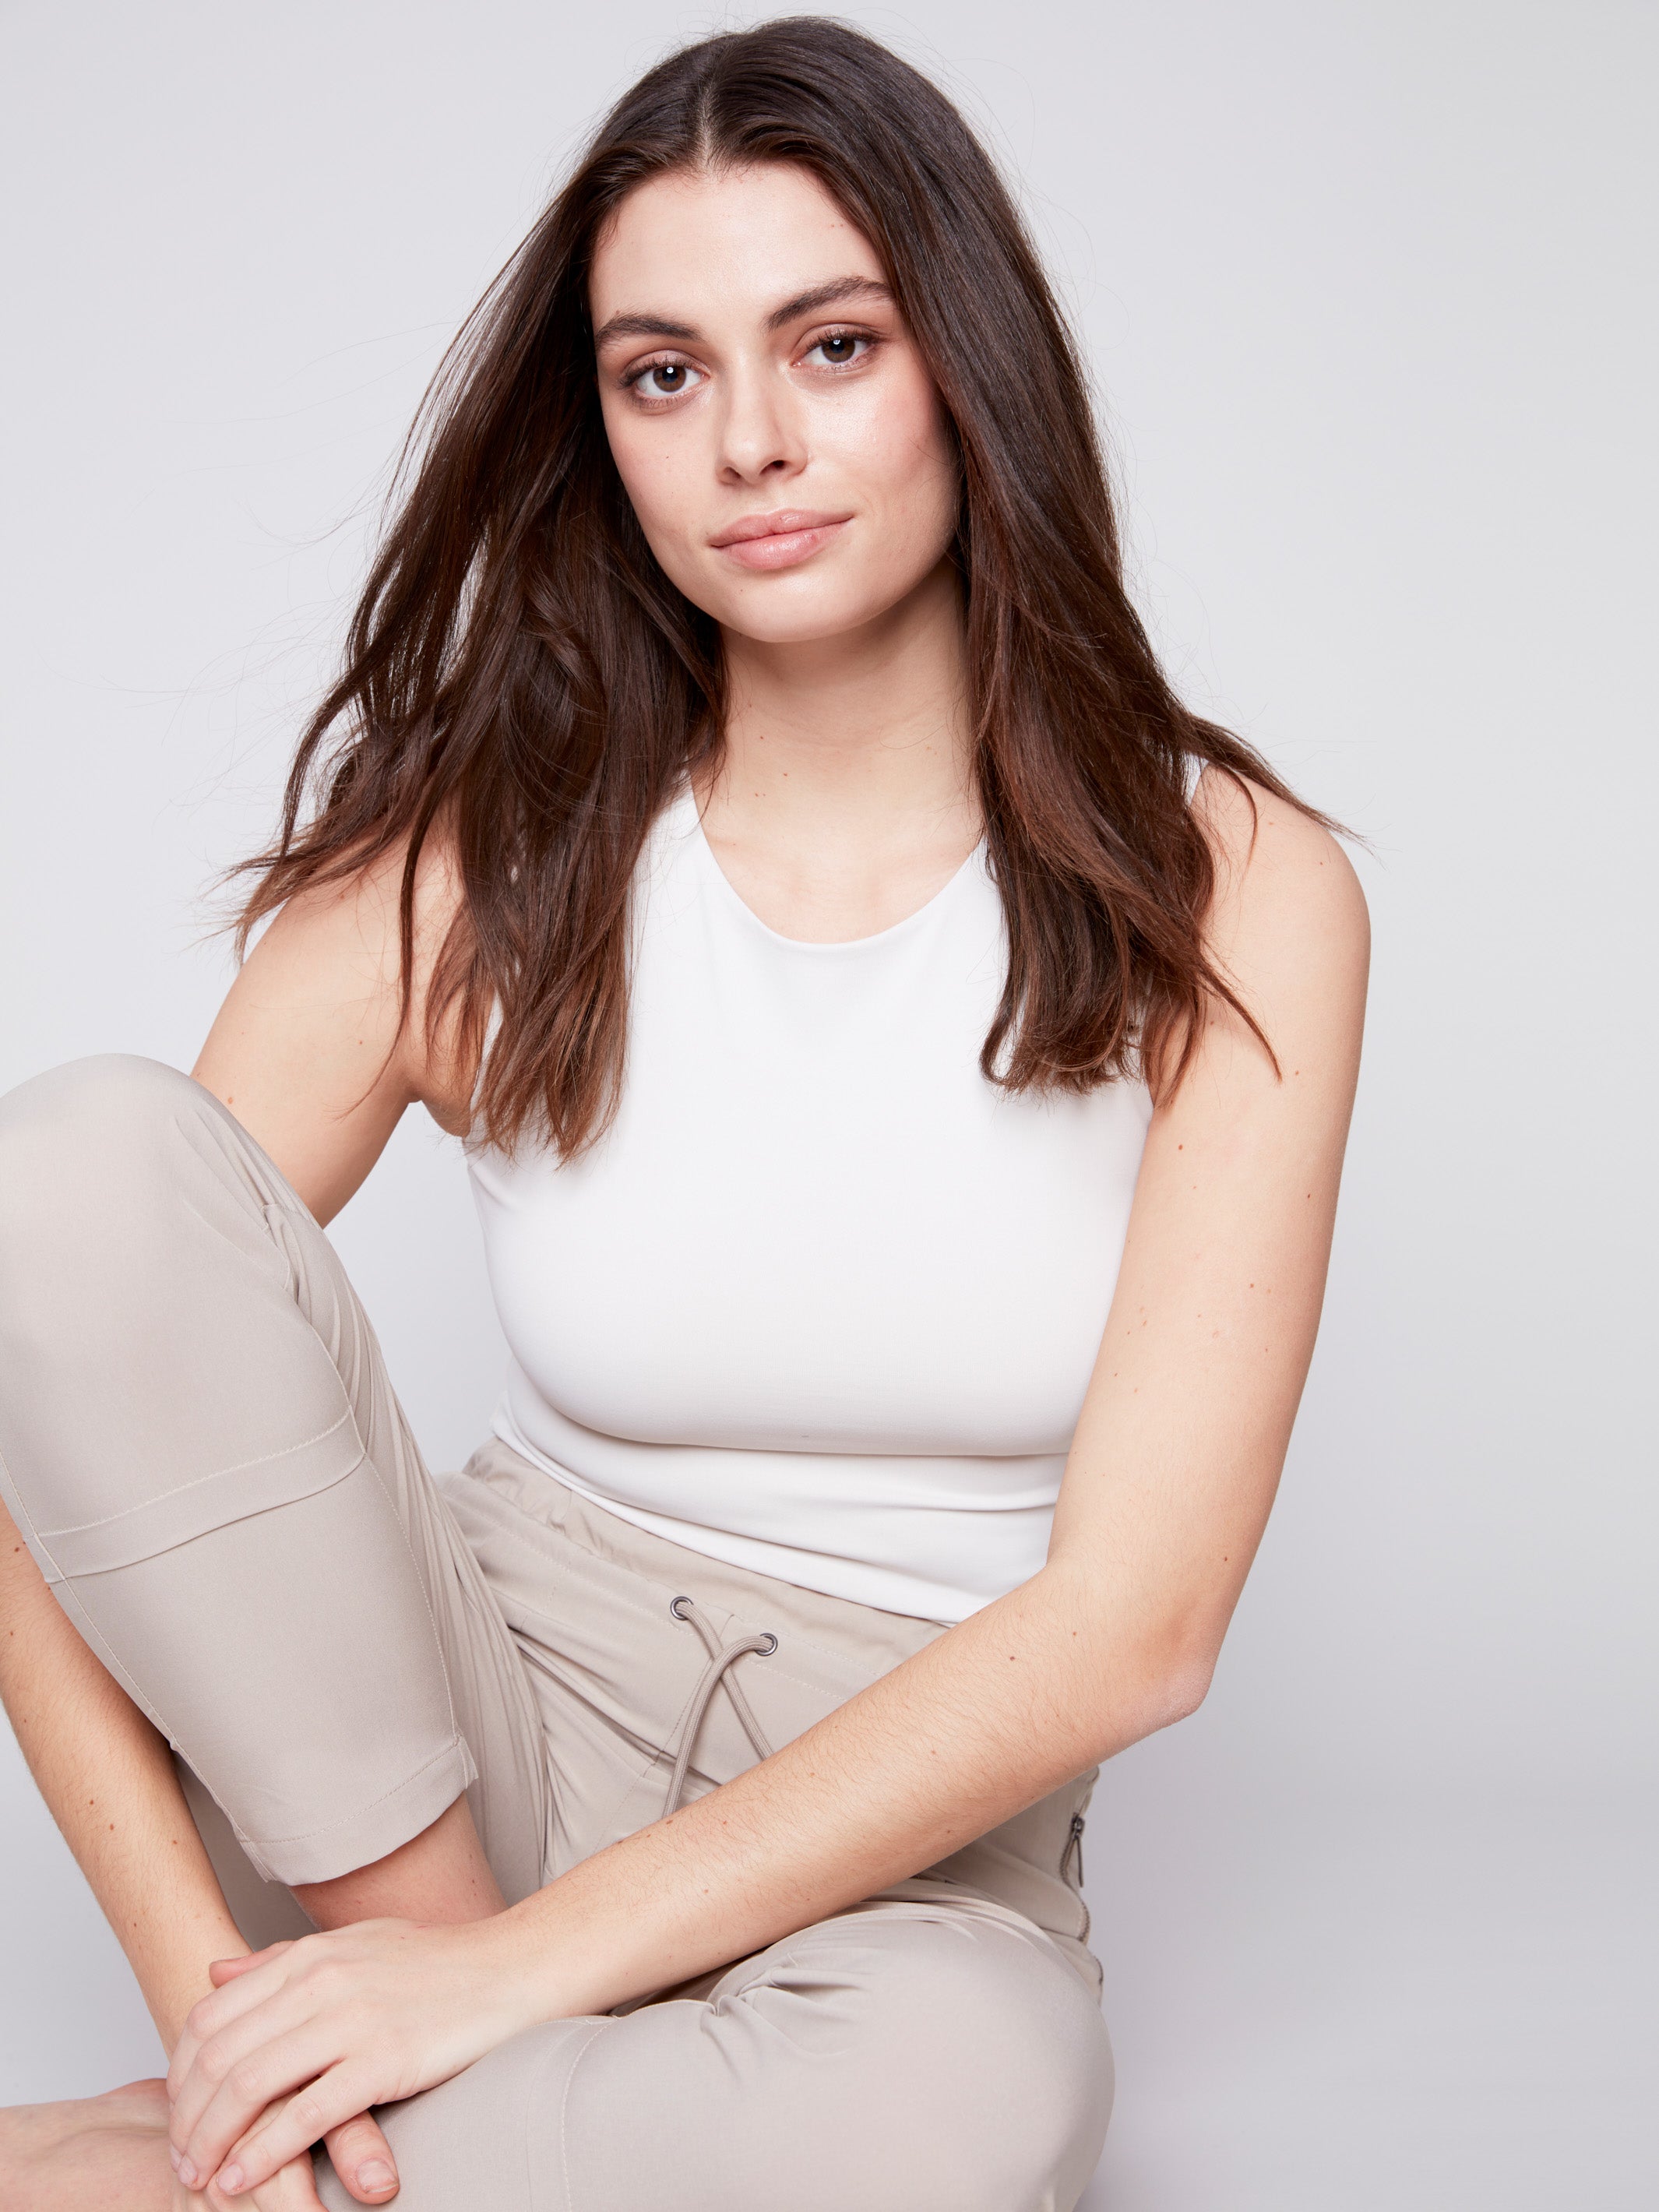 Neutrals Collection - Women's clothing in neutral tones - Charlie B Canada